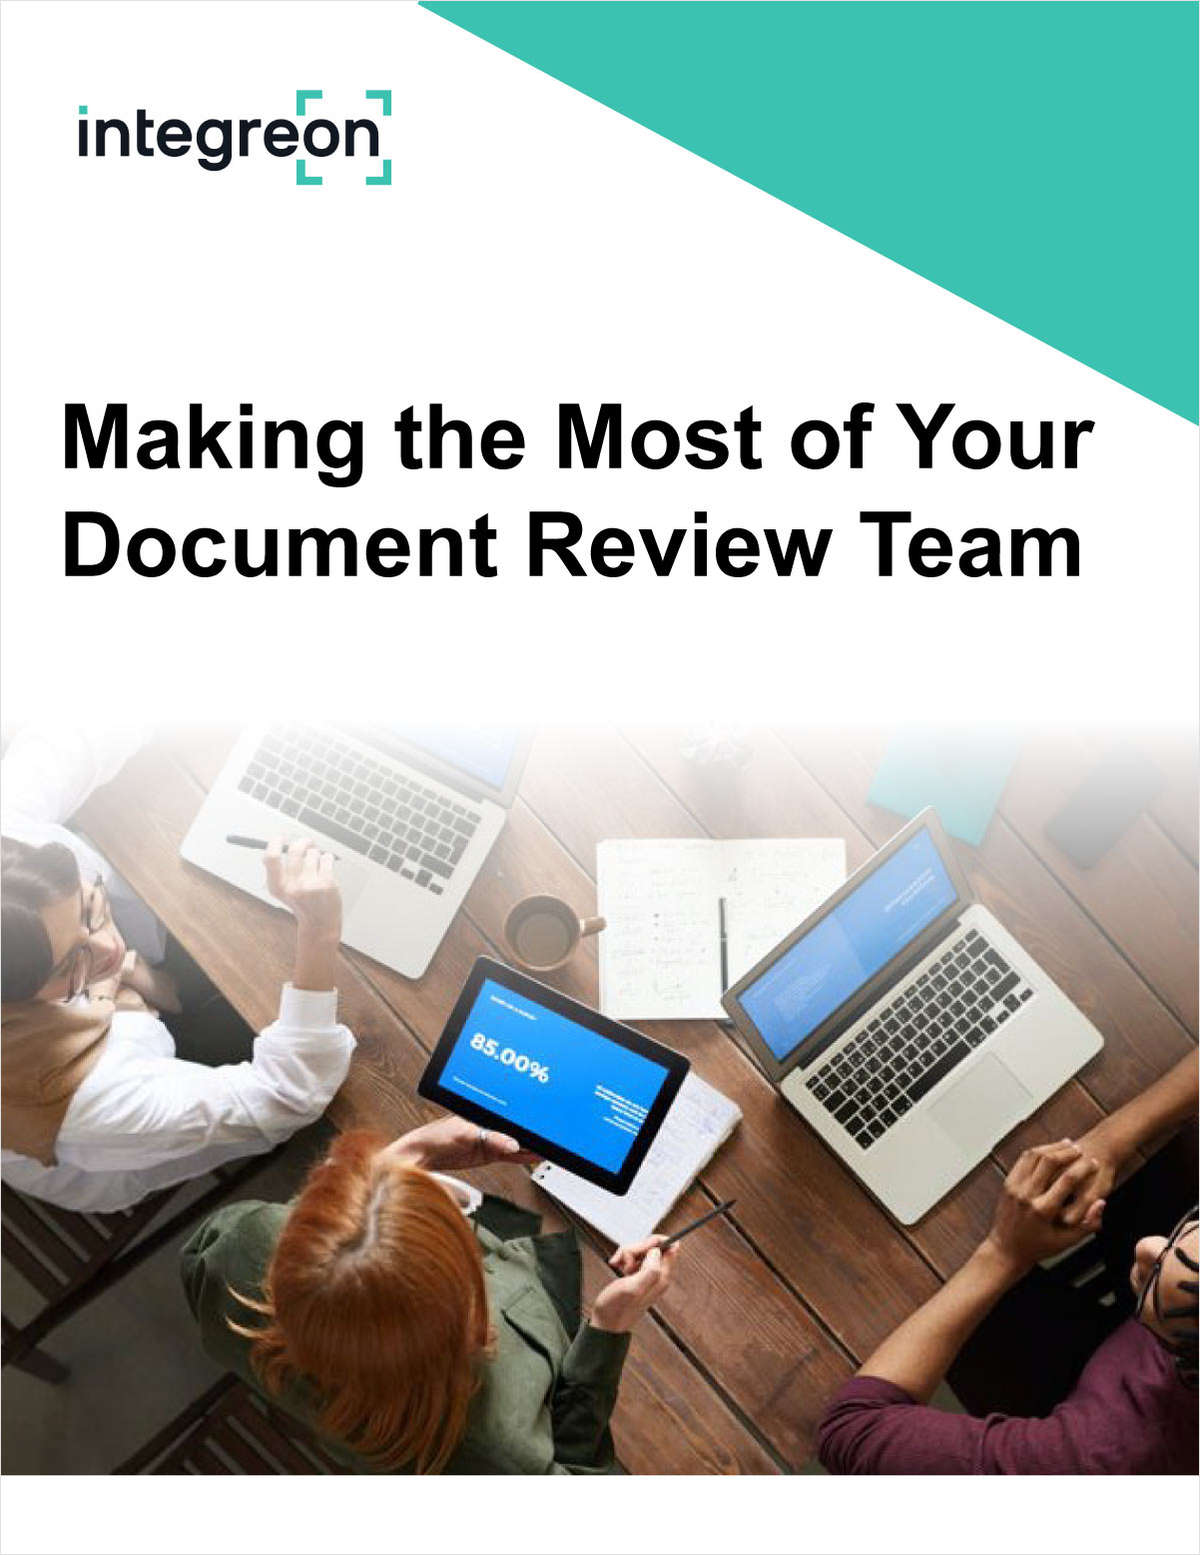 Unlock the untapped potential of your document review teams! Their expertise and case knowledge often go underutilized in subsequent stages of disputes or investigations. Discover how rethinking the role of review teams can empower lawyers to leverage their valuable skills and knowledge for maximum impact.